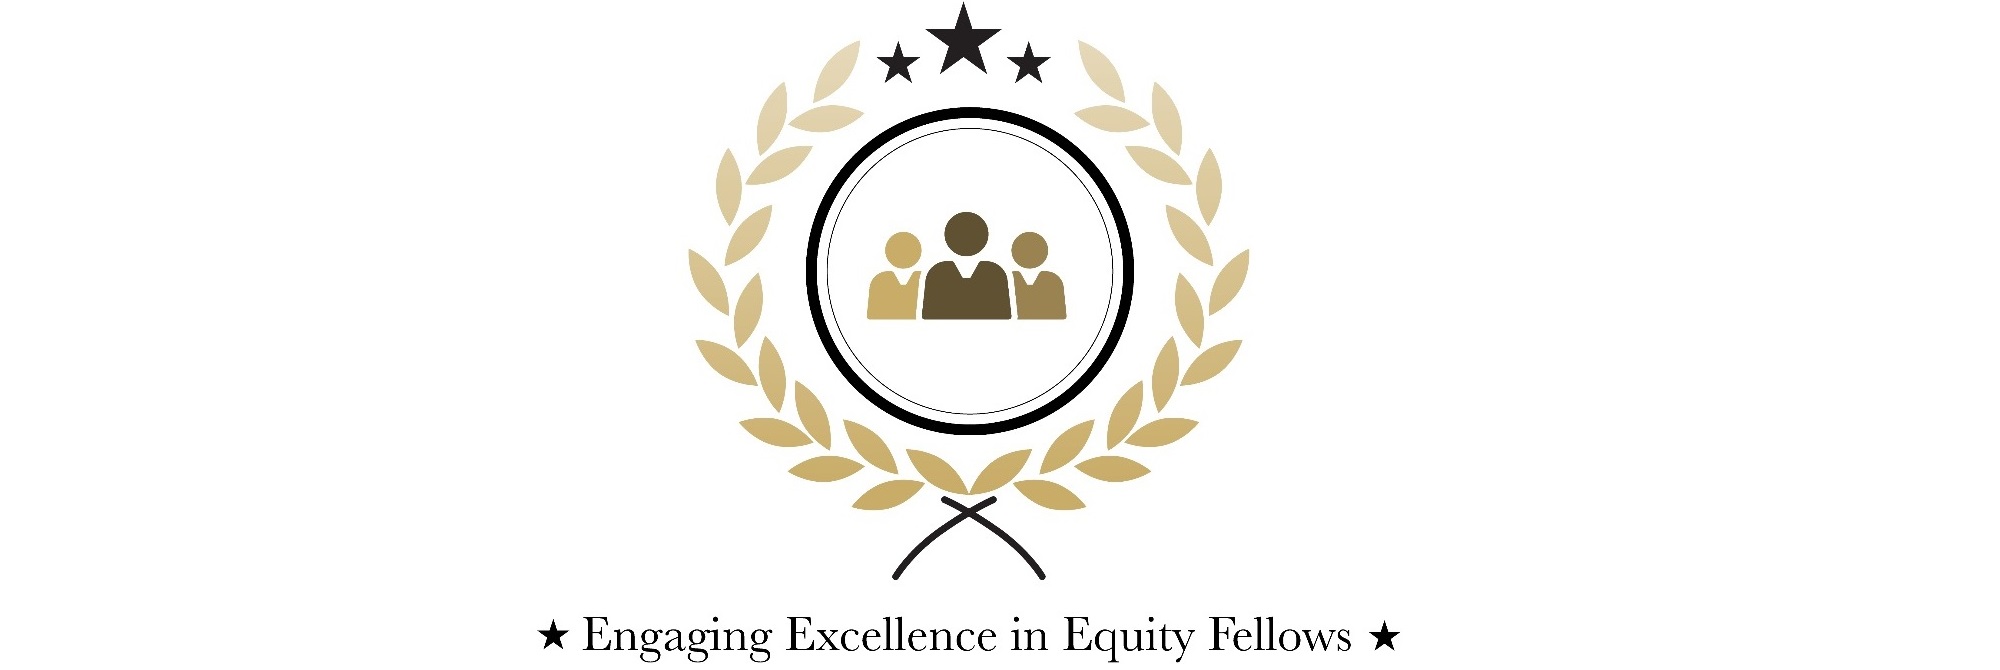 Engaging Excellence in Equity Fellows-Use